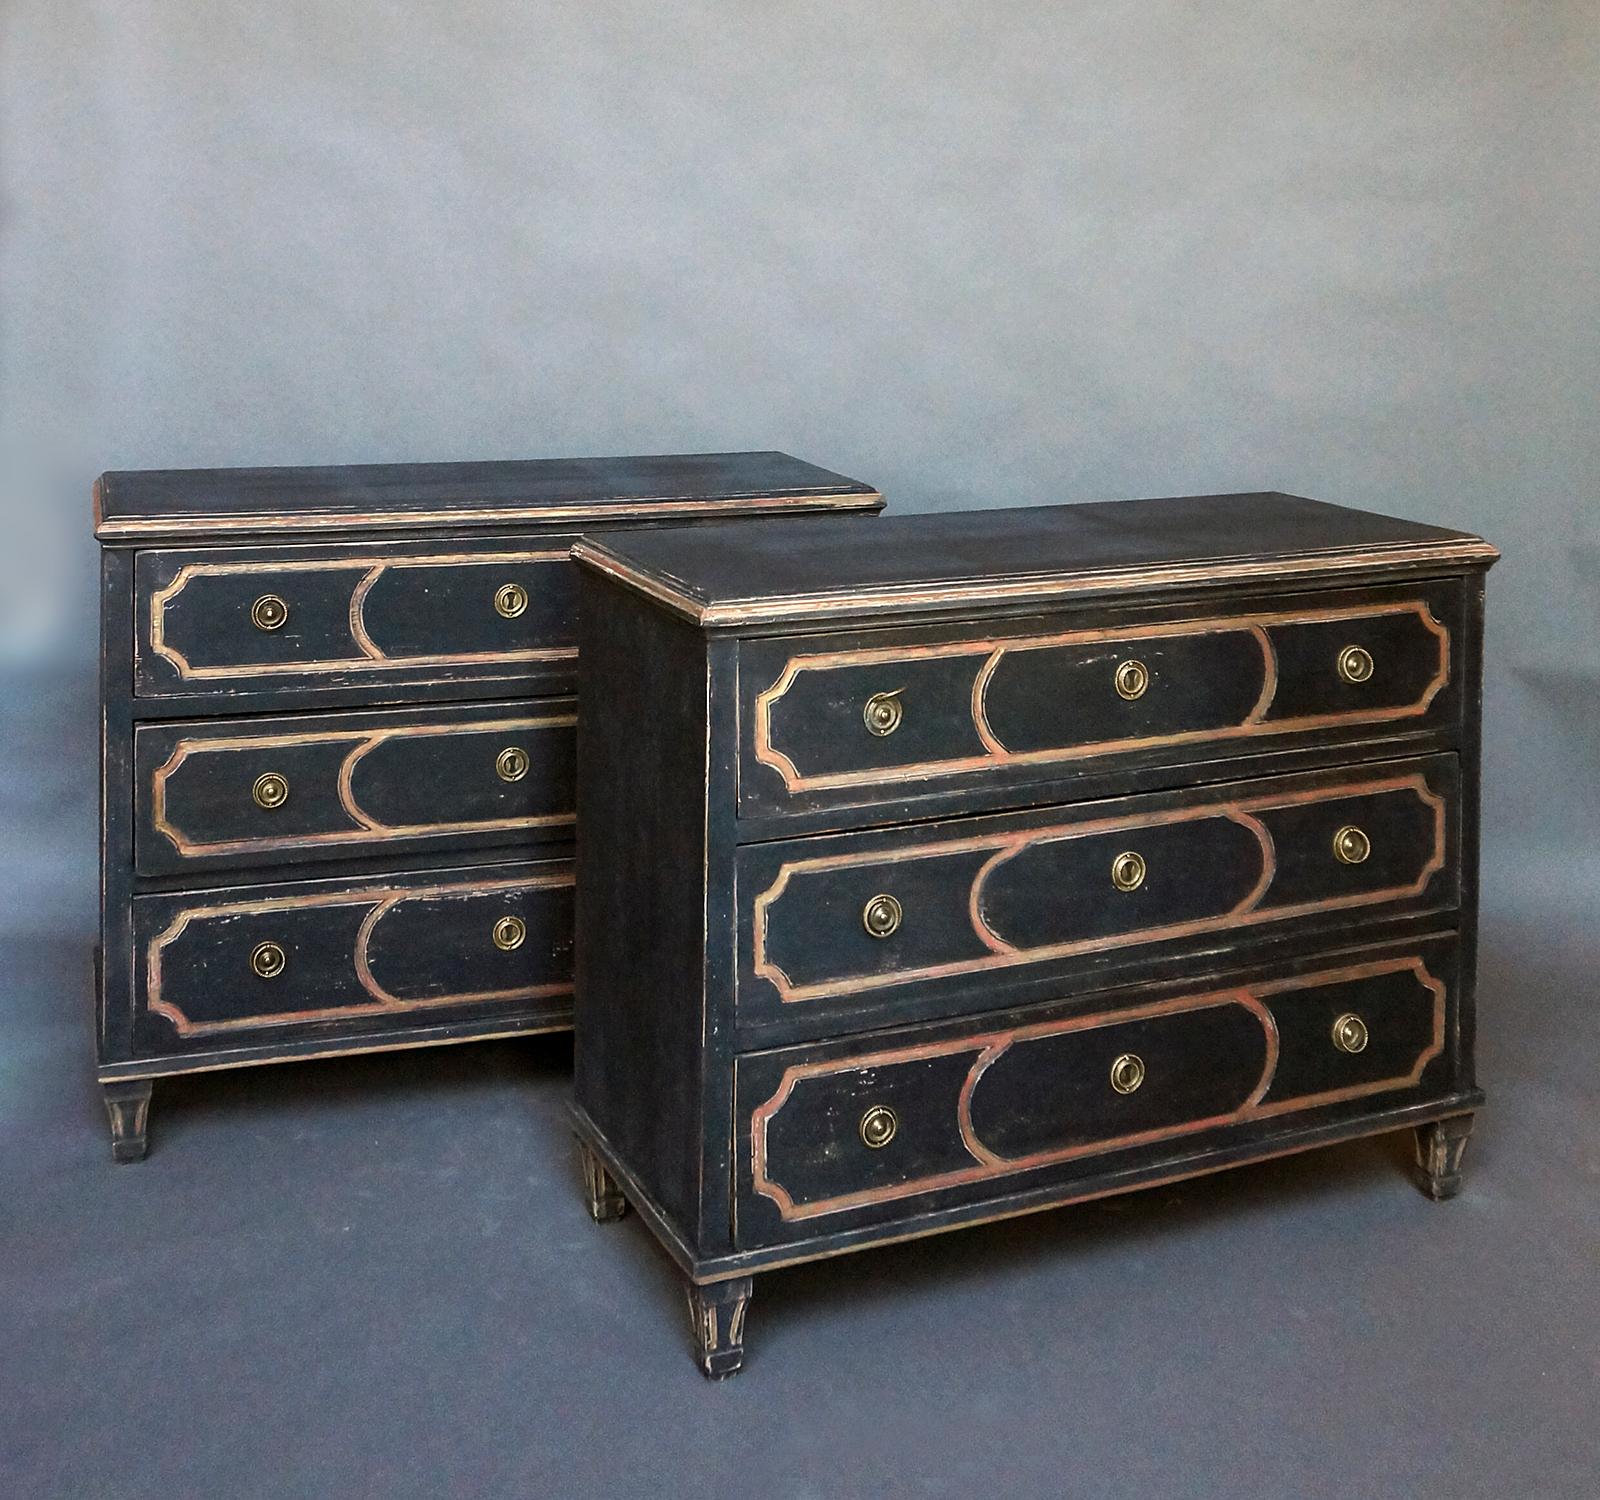 Pair of neoclassical three drawer chests, Sweden circa 1860, with shaped tops, incised detail, and brass hardware. The tapering square feet have matching decoration.